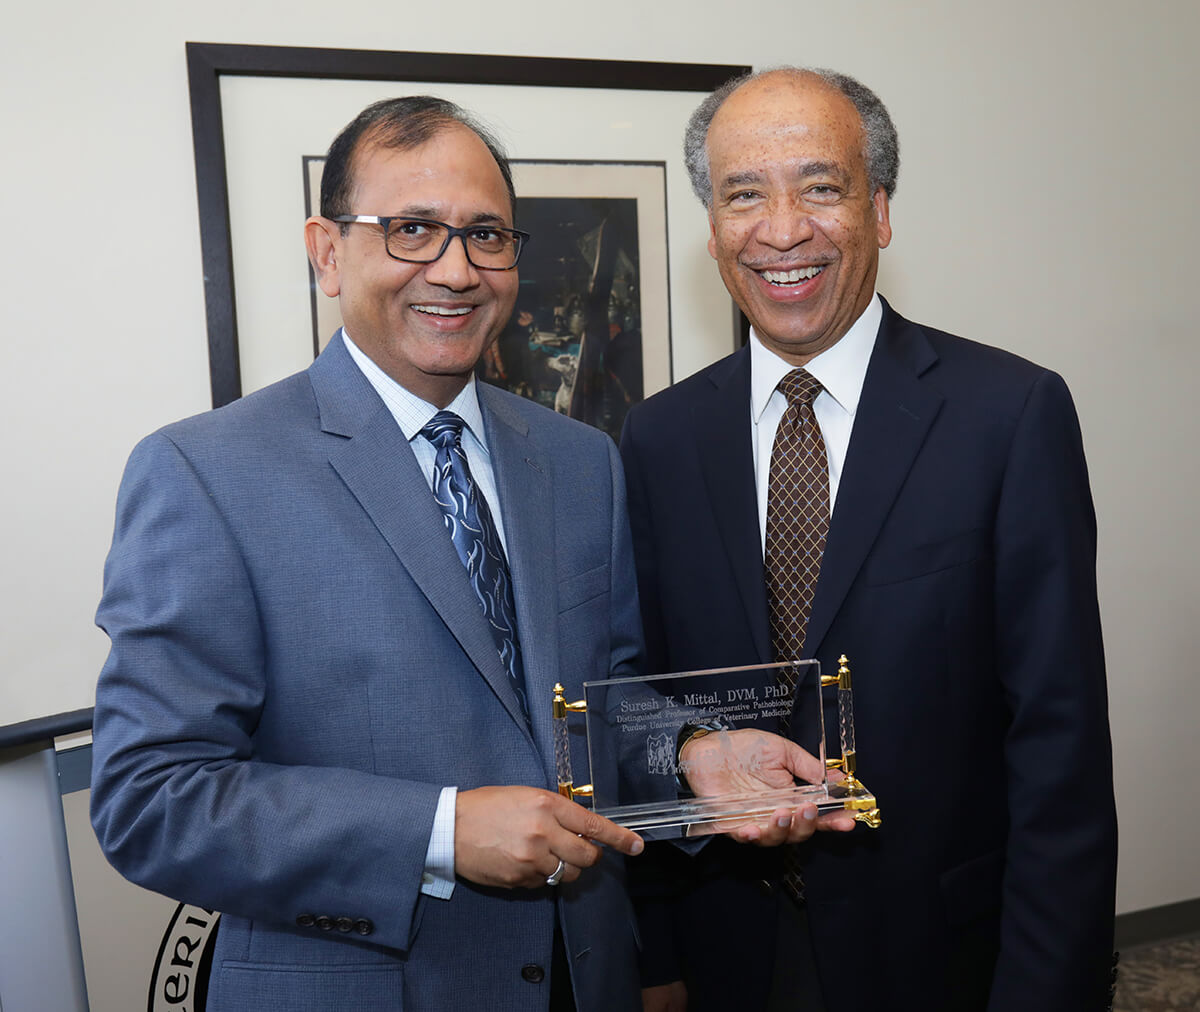 Dr. Suresh Mittal pictured with Dean Reed